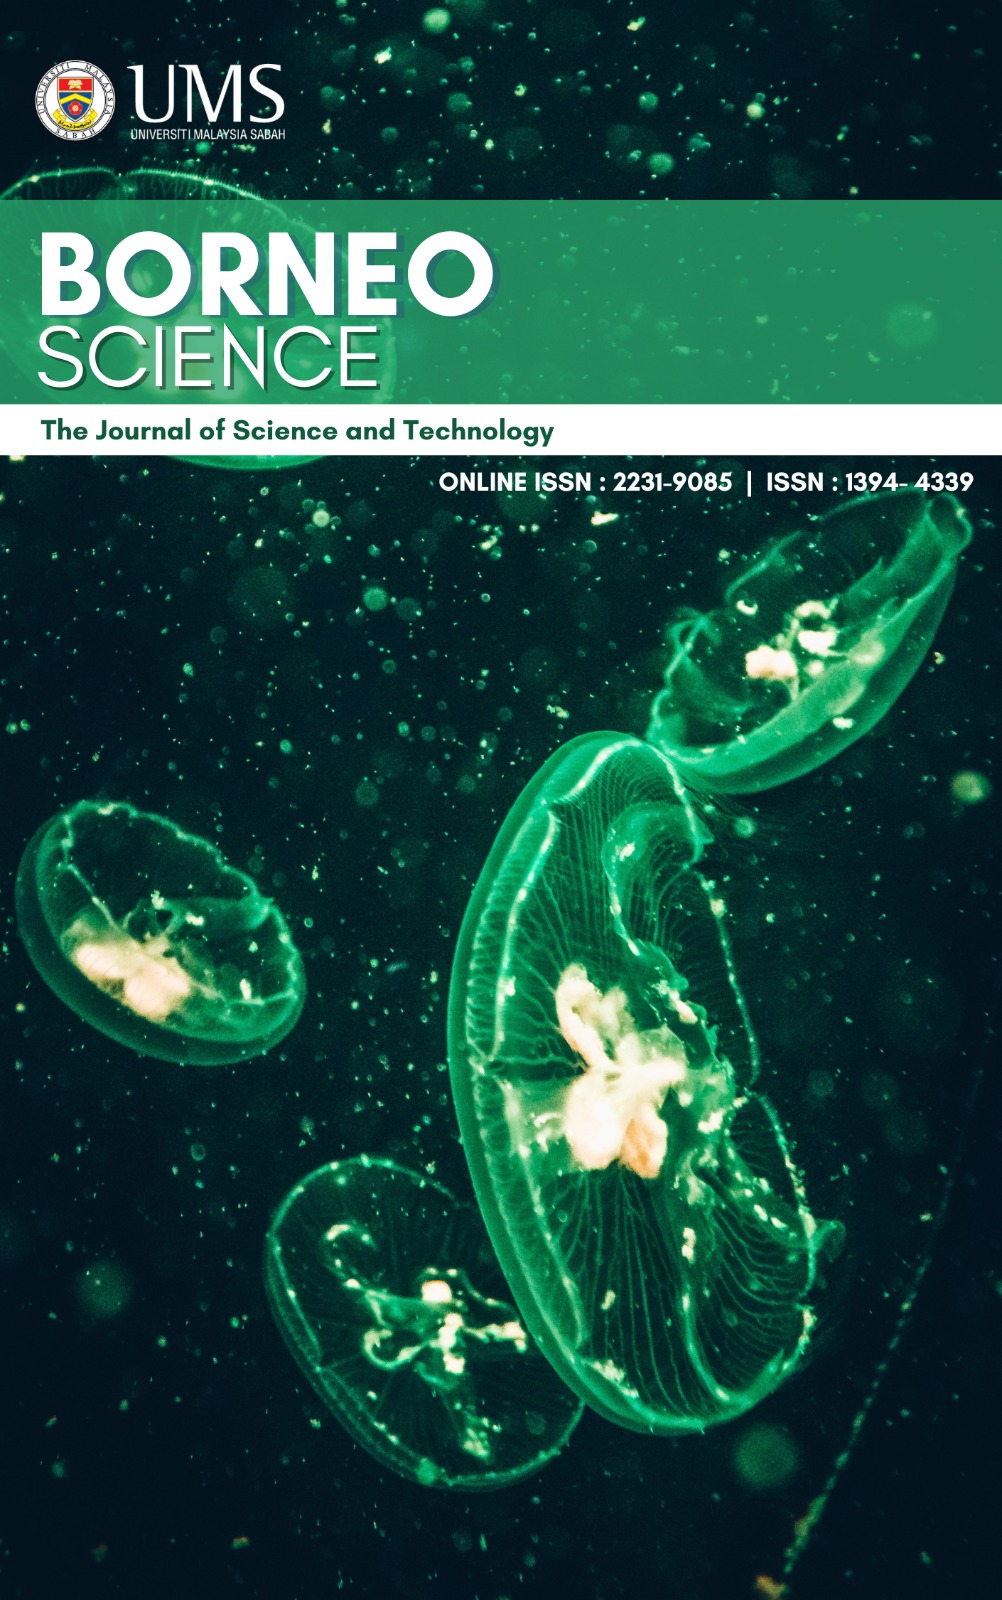 					View Vol. 42 No. 1 (2021): Borneo Science Journal Volume 42 (Issue 1), March 2021
				